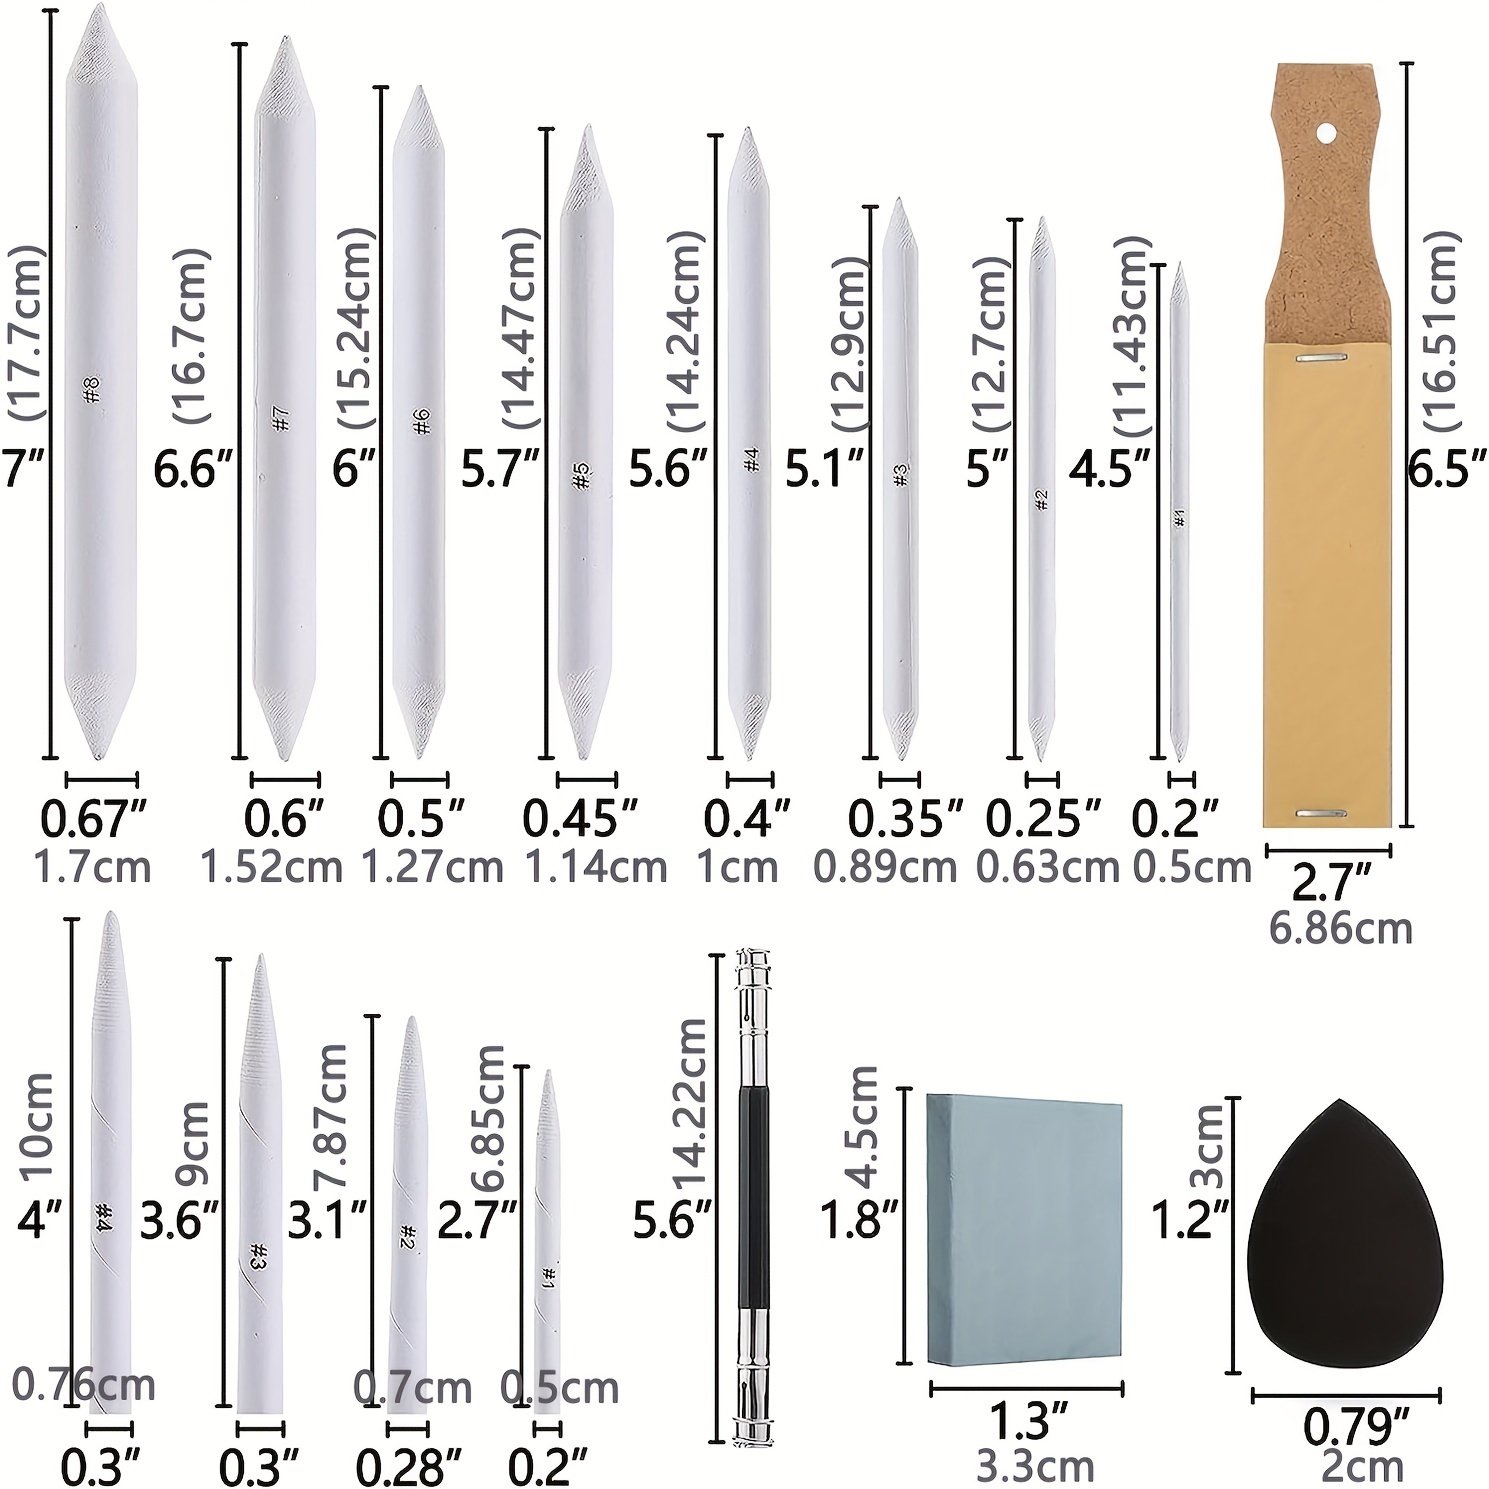 HIFORNY 38 PCS Sketch Drawing Tools - Blending Stumps and Tortillions Set  Blending Tools with Art Sketch Wipe Scrapers,Rub Sponge,Kneaded Eraser and